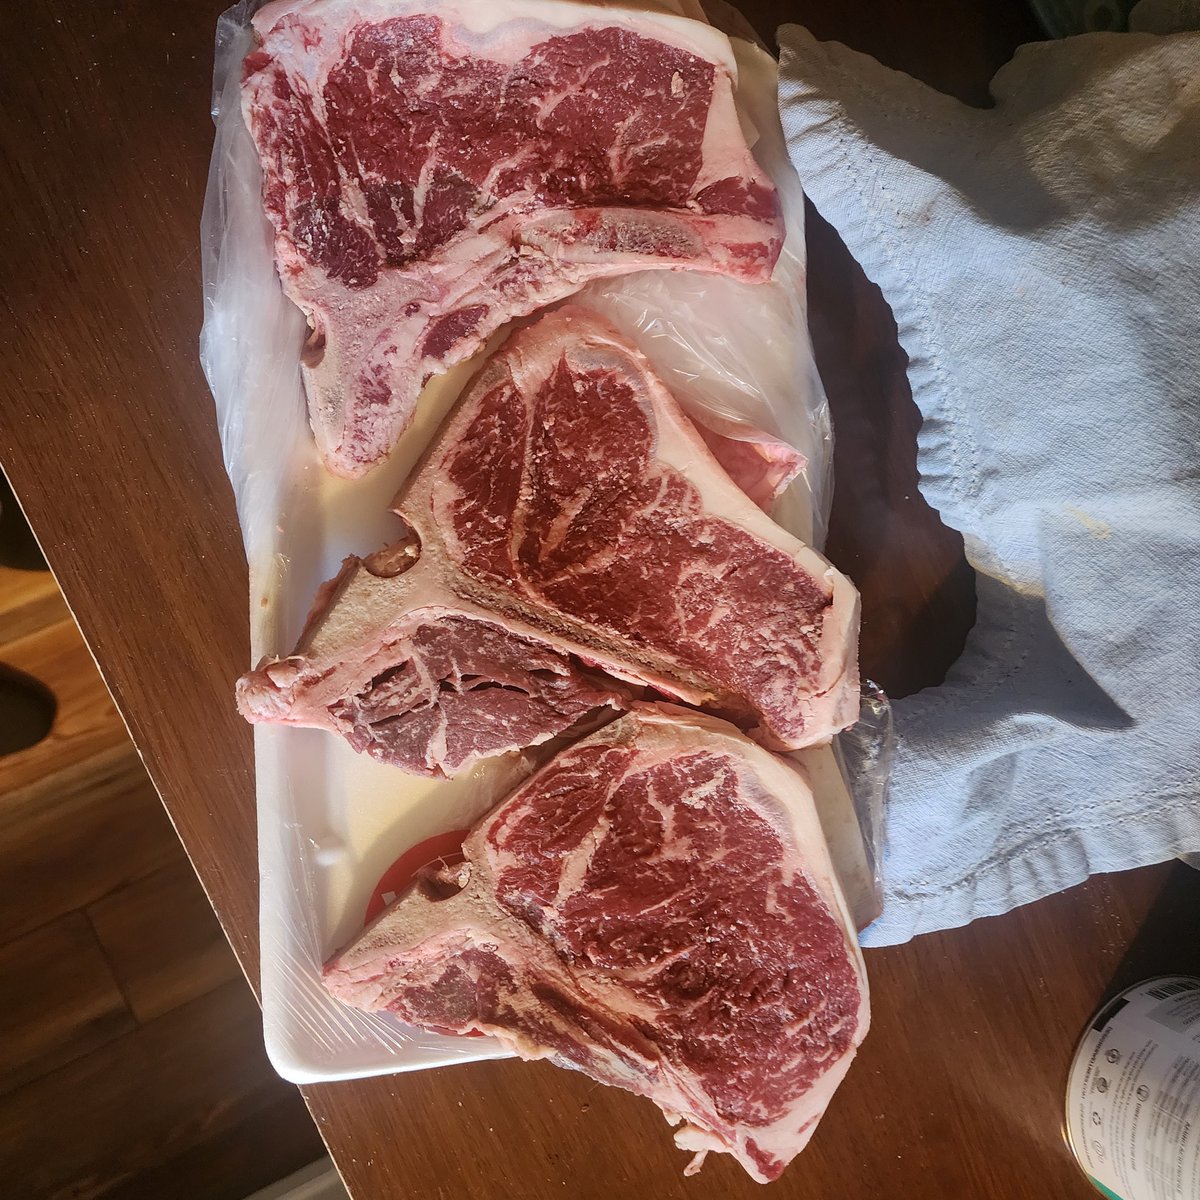 'T-Bone' from @HarrisTeeter I call BS!!! IFKYK
I bought a value pack of TBone steaks for Mothers Day dinner.  Because they were stacked and the placement of the sticker, I didn't notice until open. Except for 1/2 of a remaining filet...these are bone-in  strip steak (which isnt a